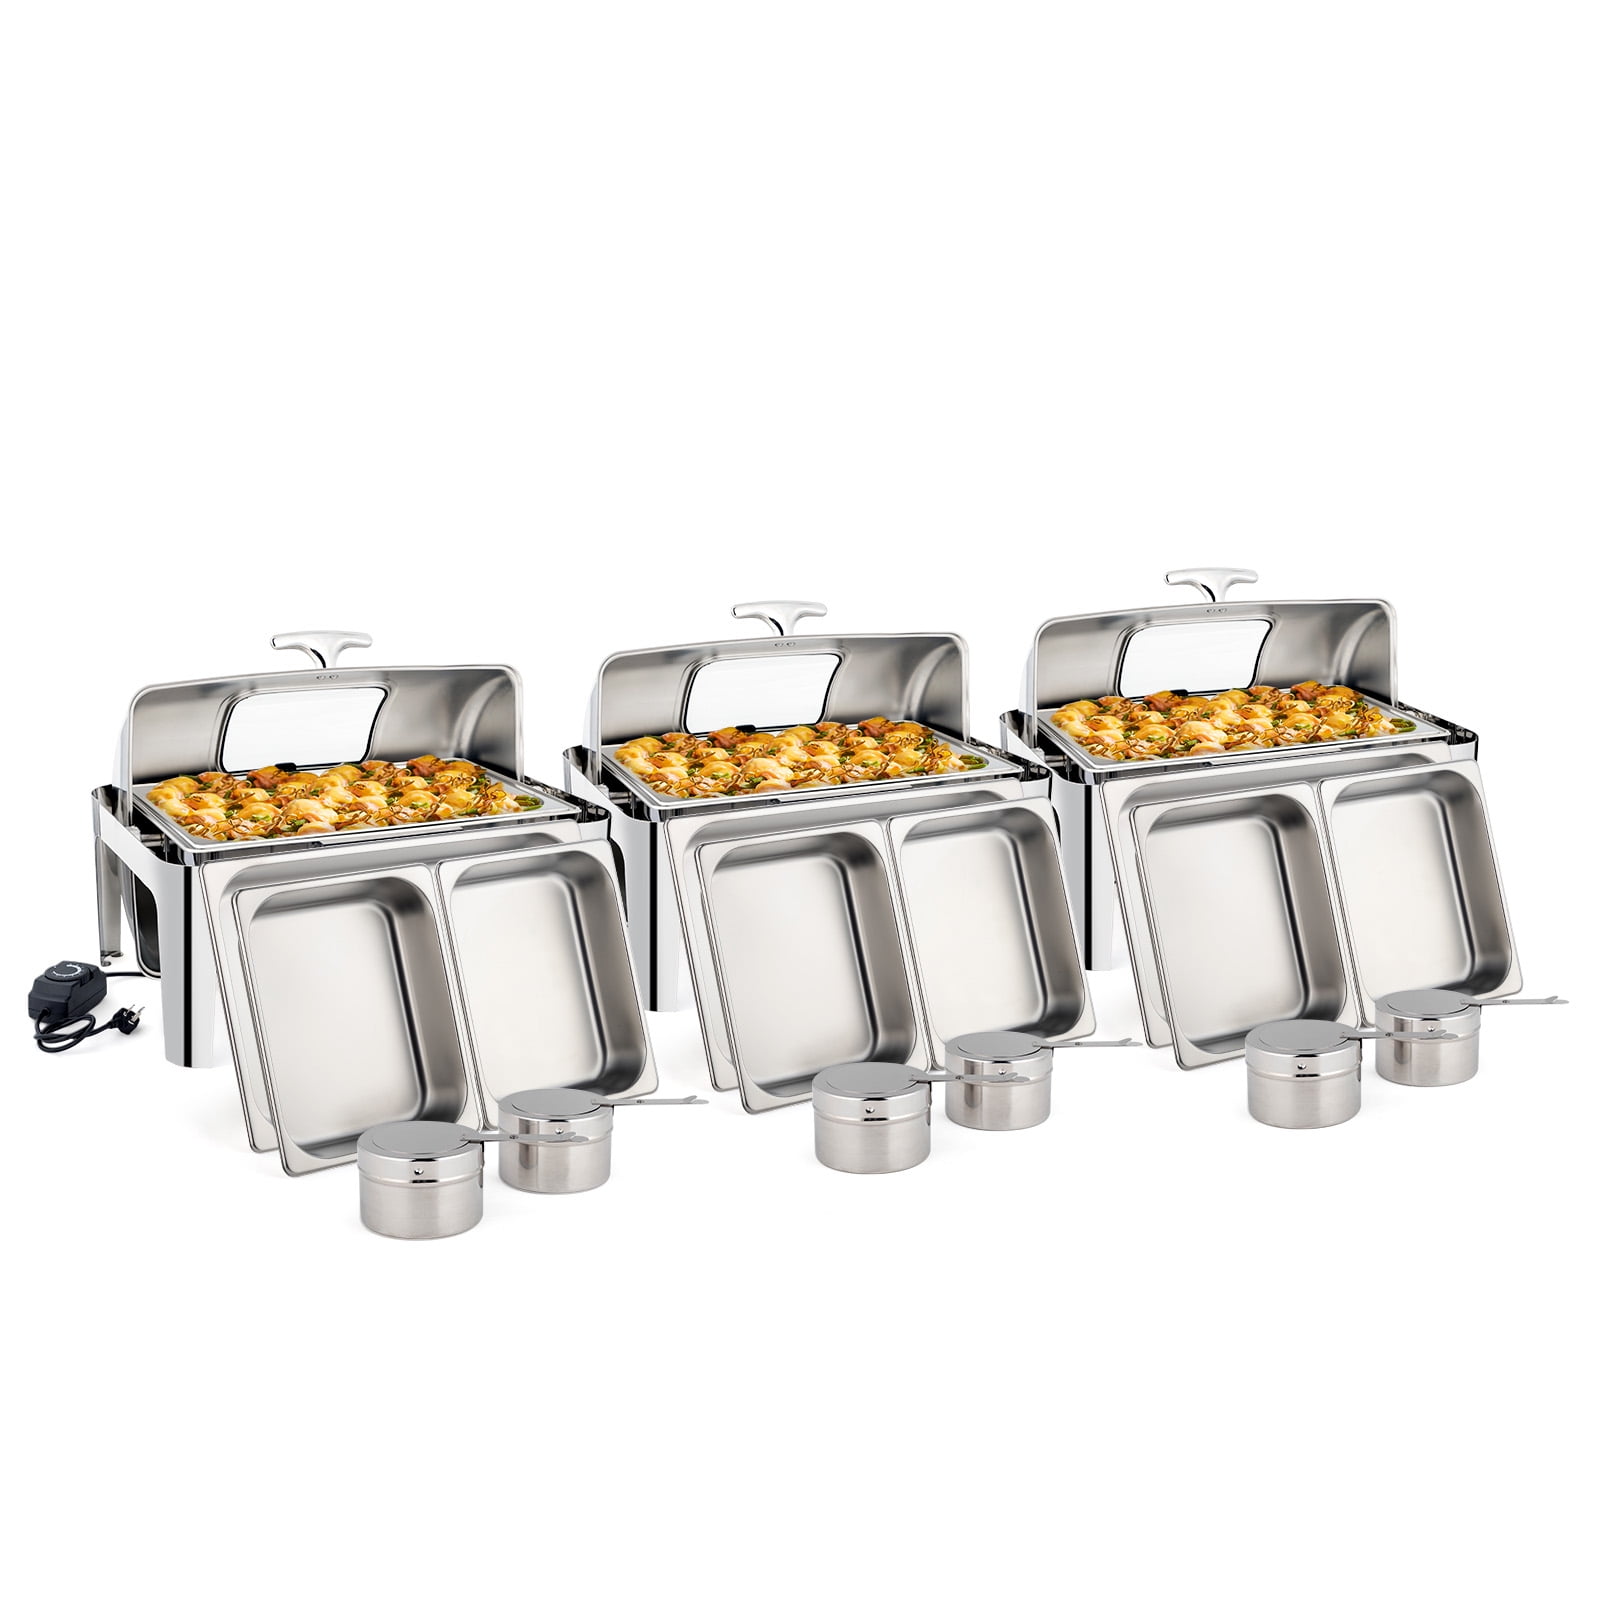 Ktaxon 9 QT Electric Chafing Dish Buffet Set,Stainless Steel Roll